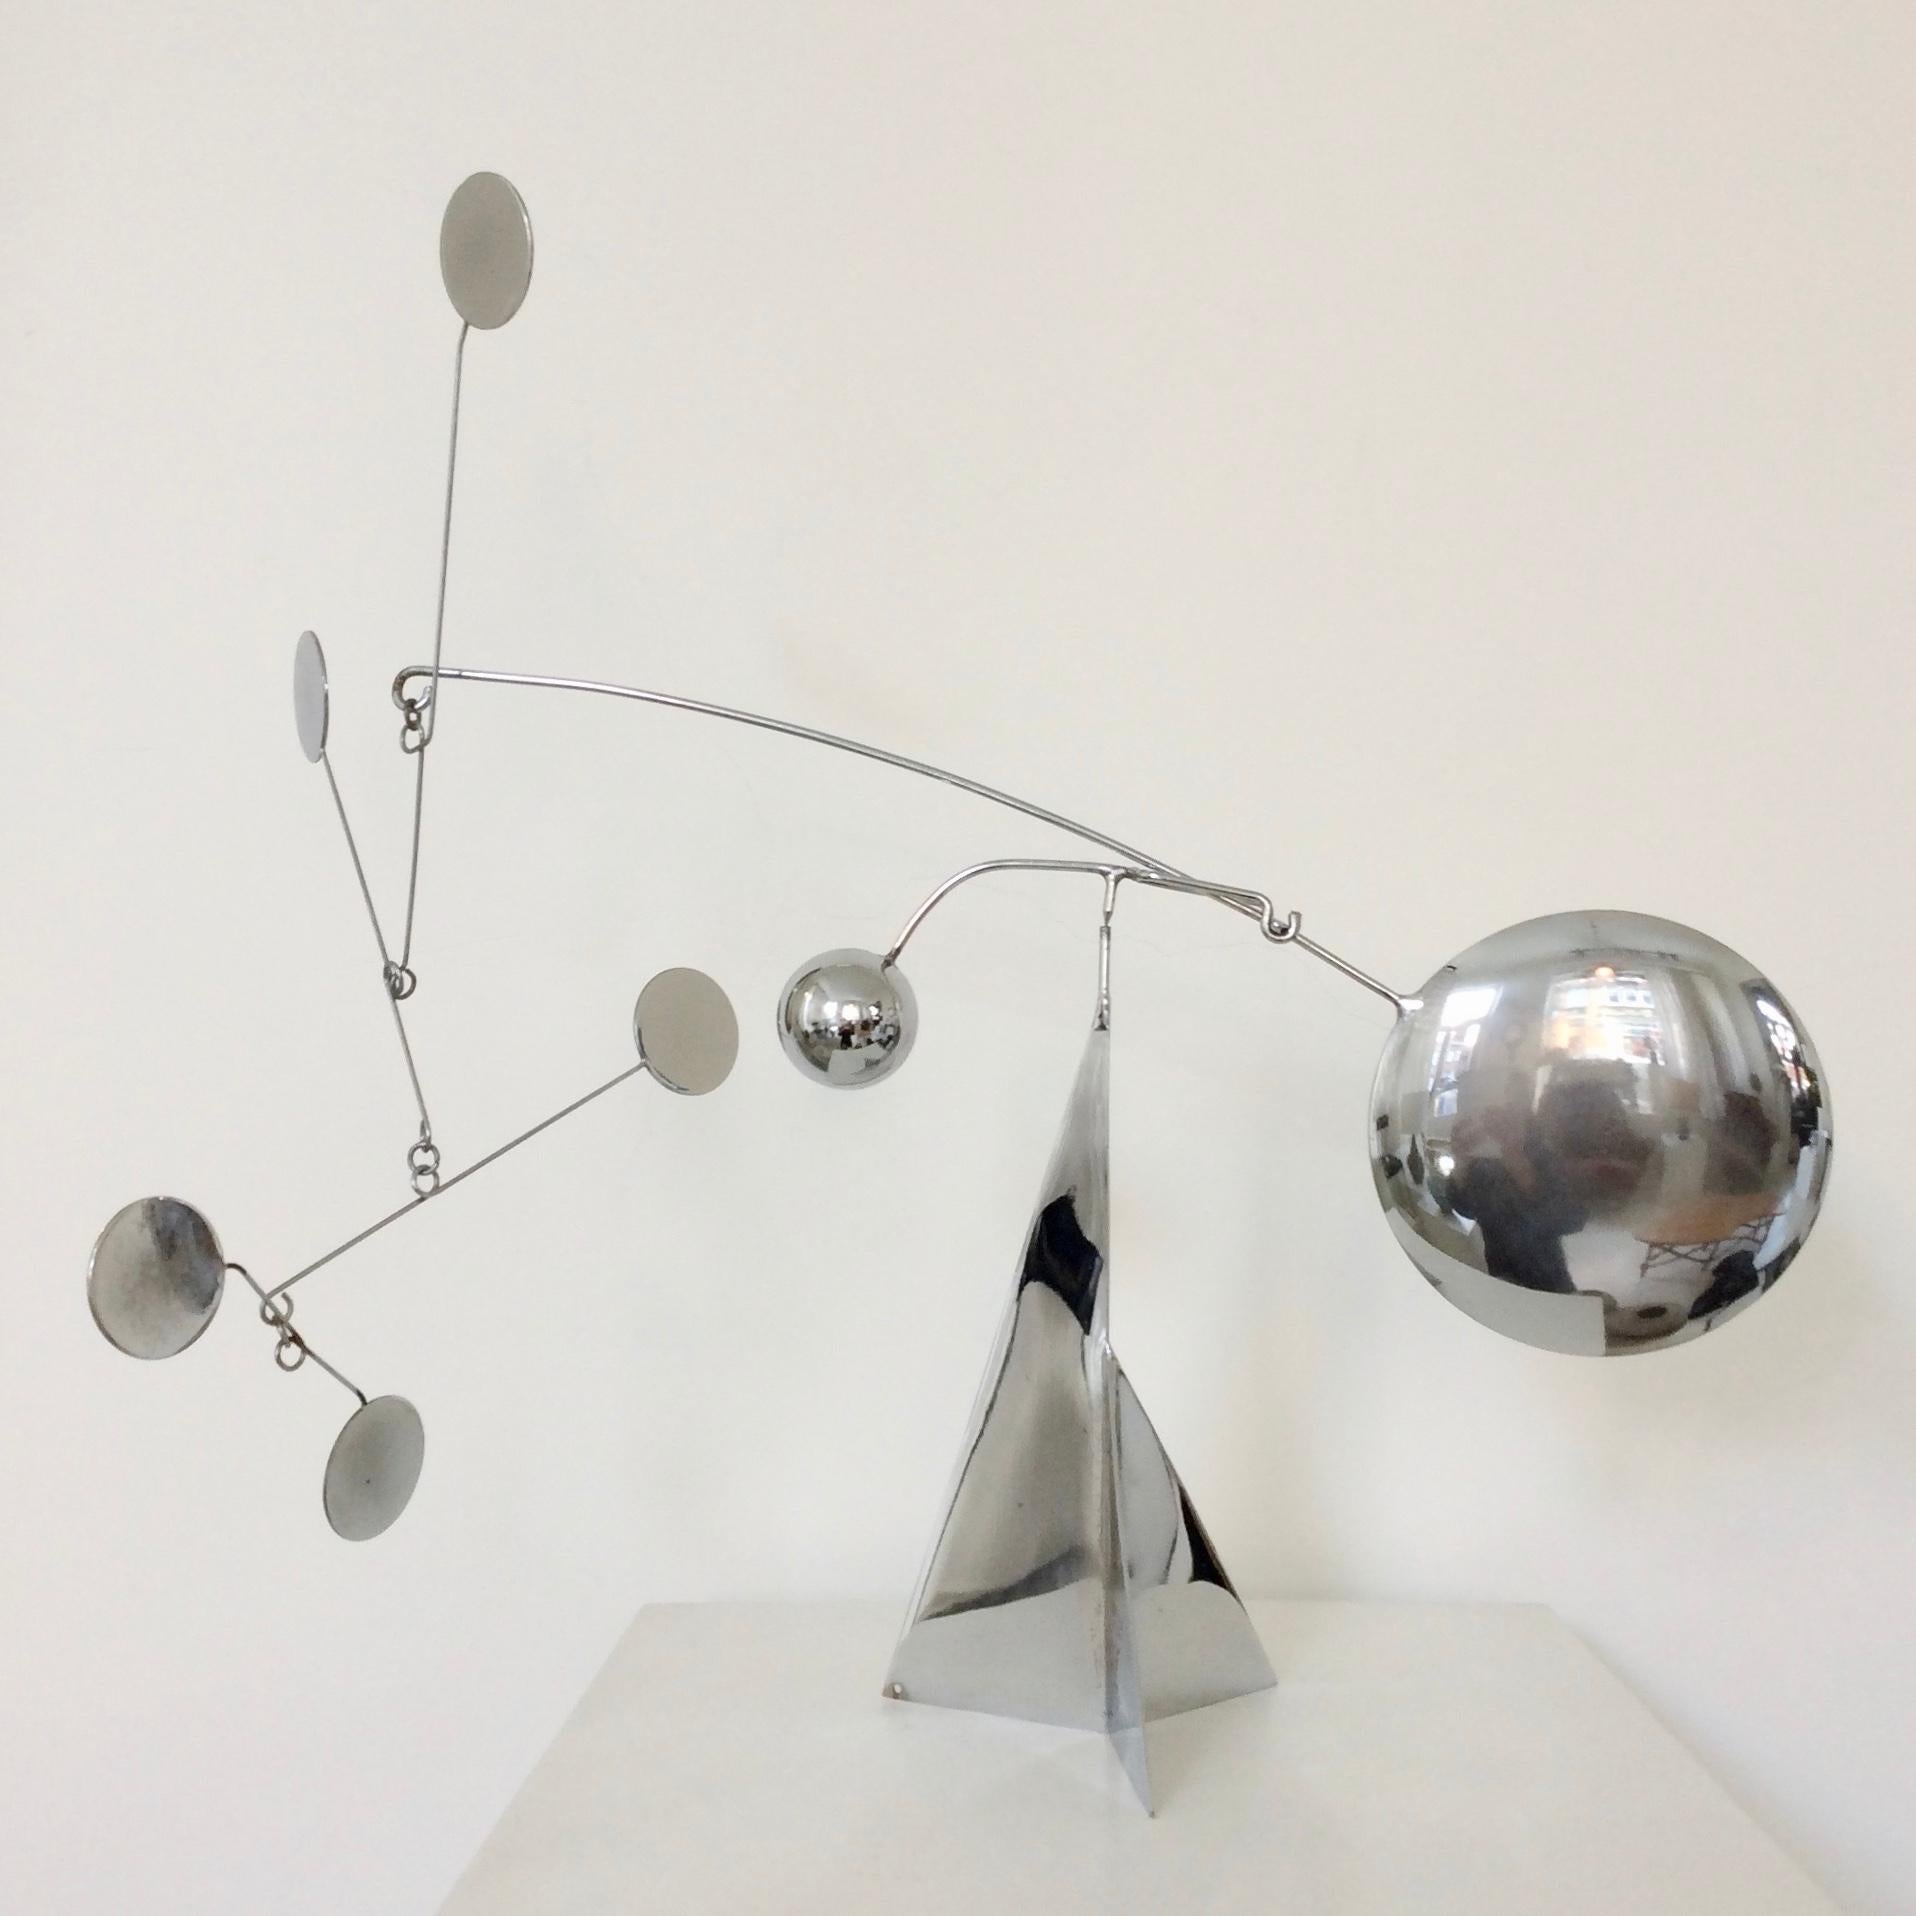 Beautiful François Colette mobile sculpture, 1972, France.
Stamped FC 72.
Chromed metal.
Original condition.
Dimensions: 42 cm H, 49 cm W, 18 cm D.
All purchases are covered by our Buyer Protection Guarantee.
This item can be returned within 14 days